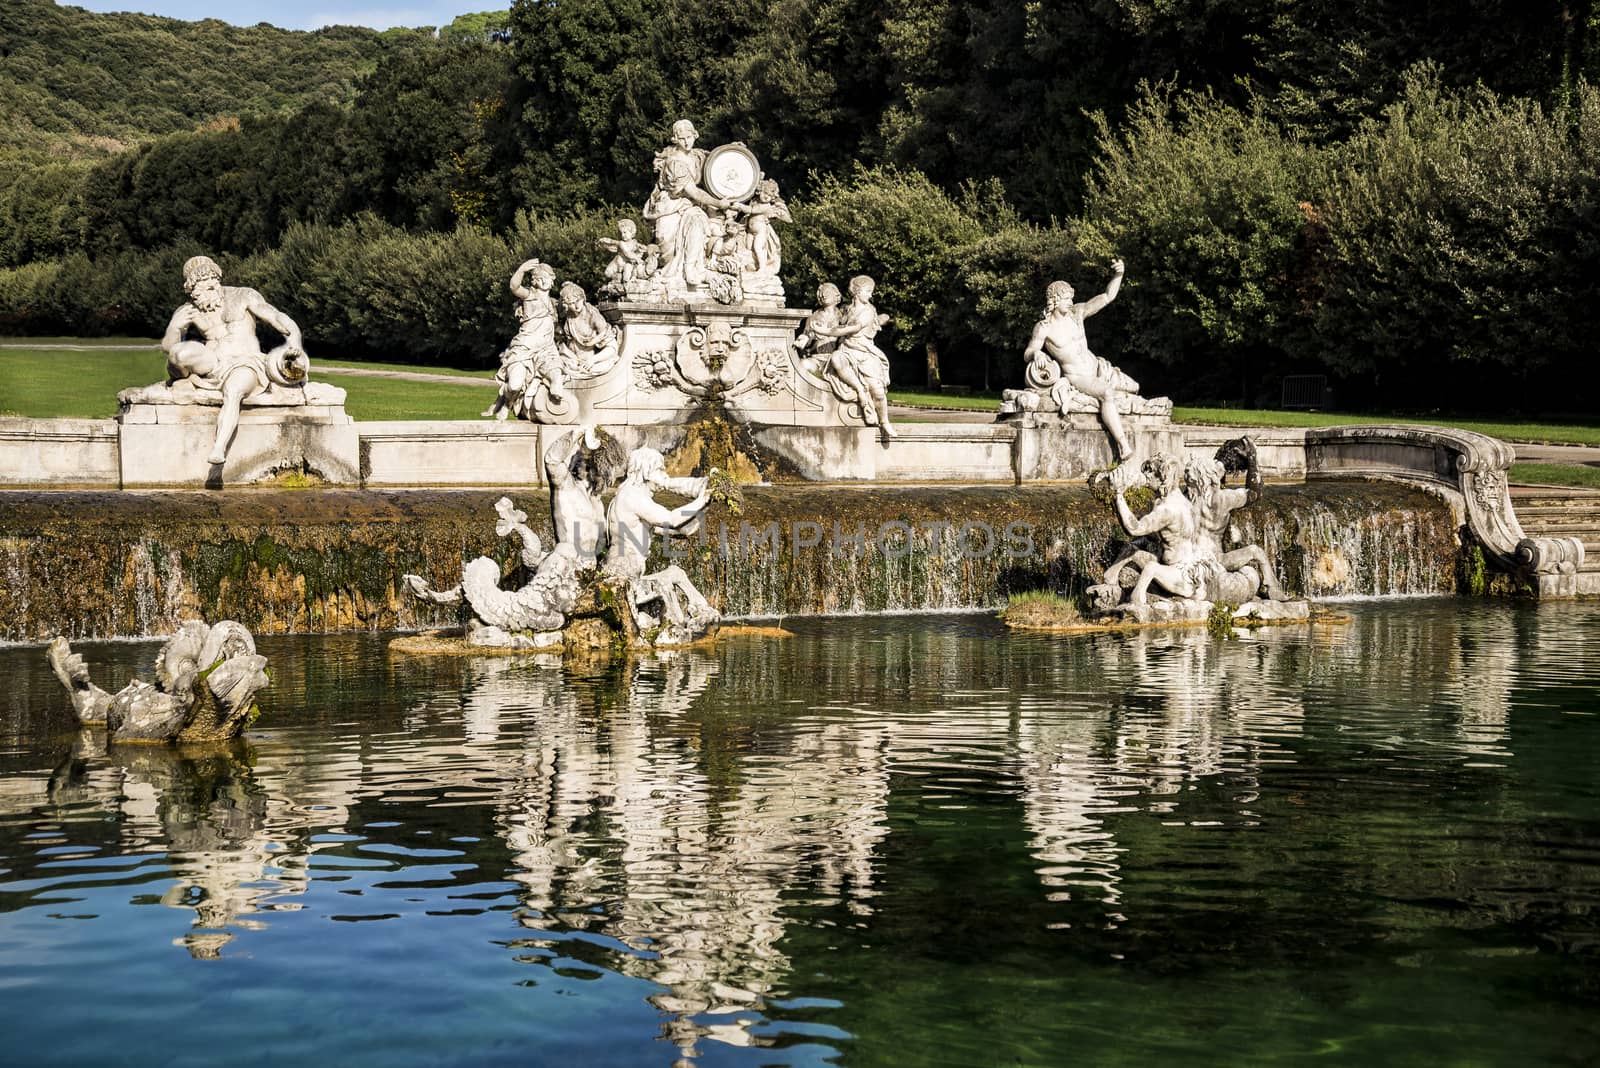 details of the fountain in the Royal Palace garden in Caserta, Italy